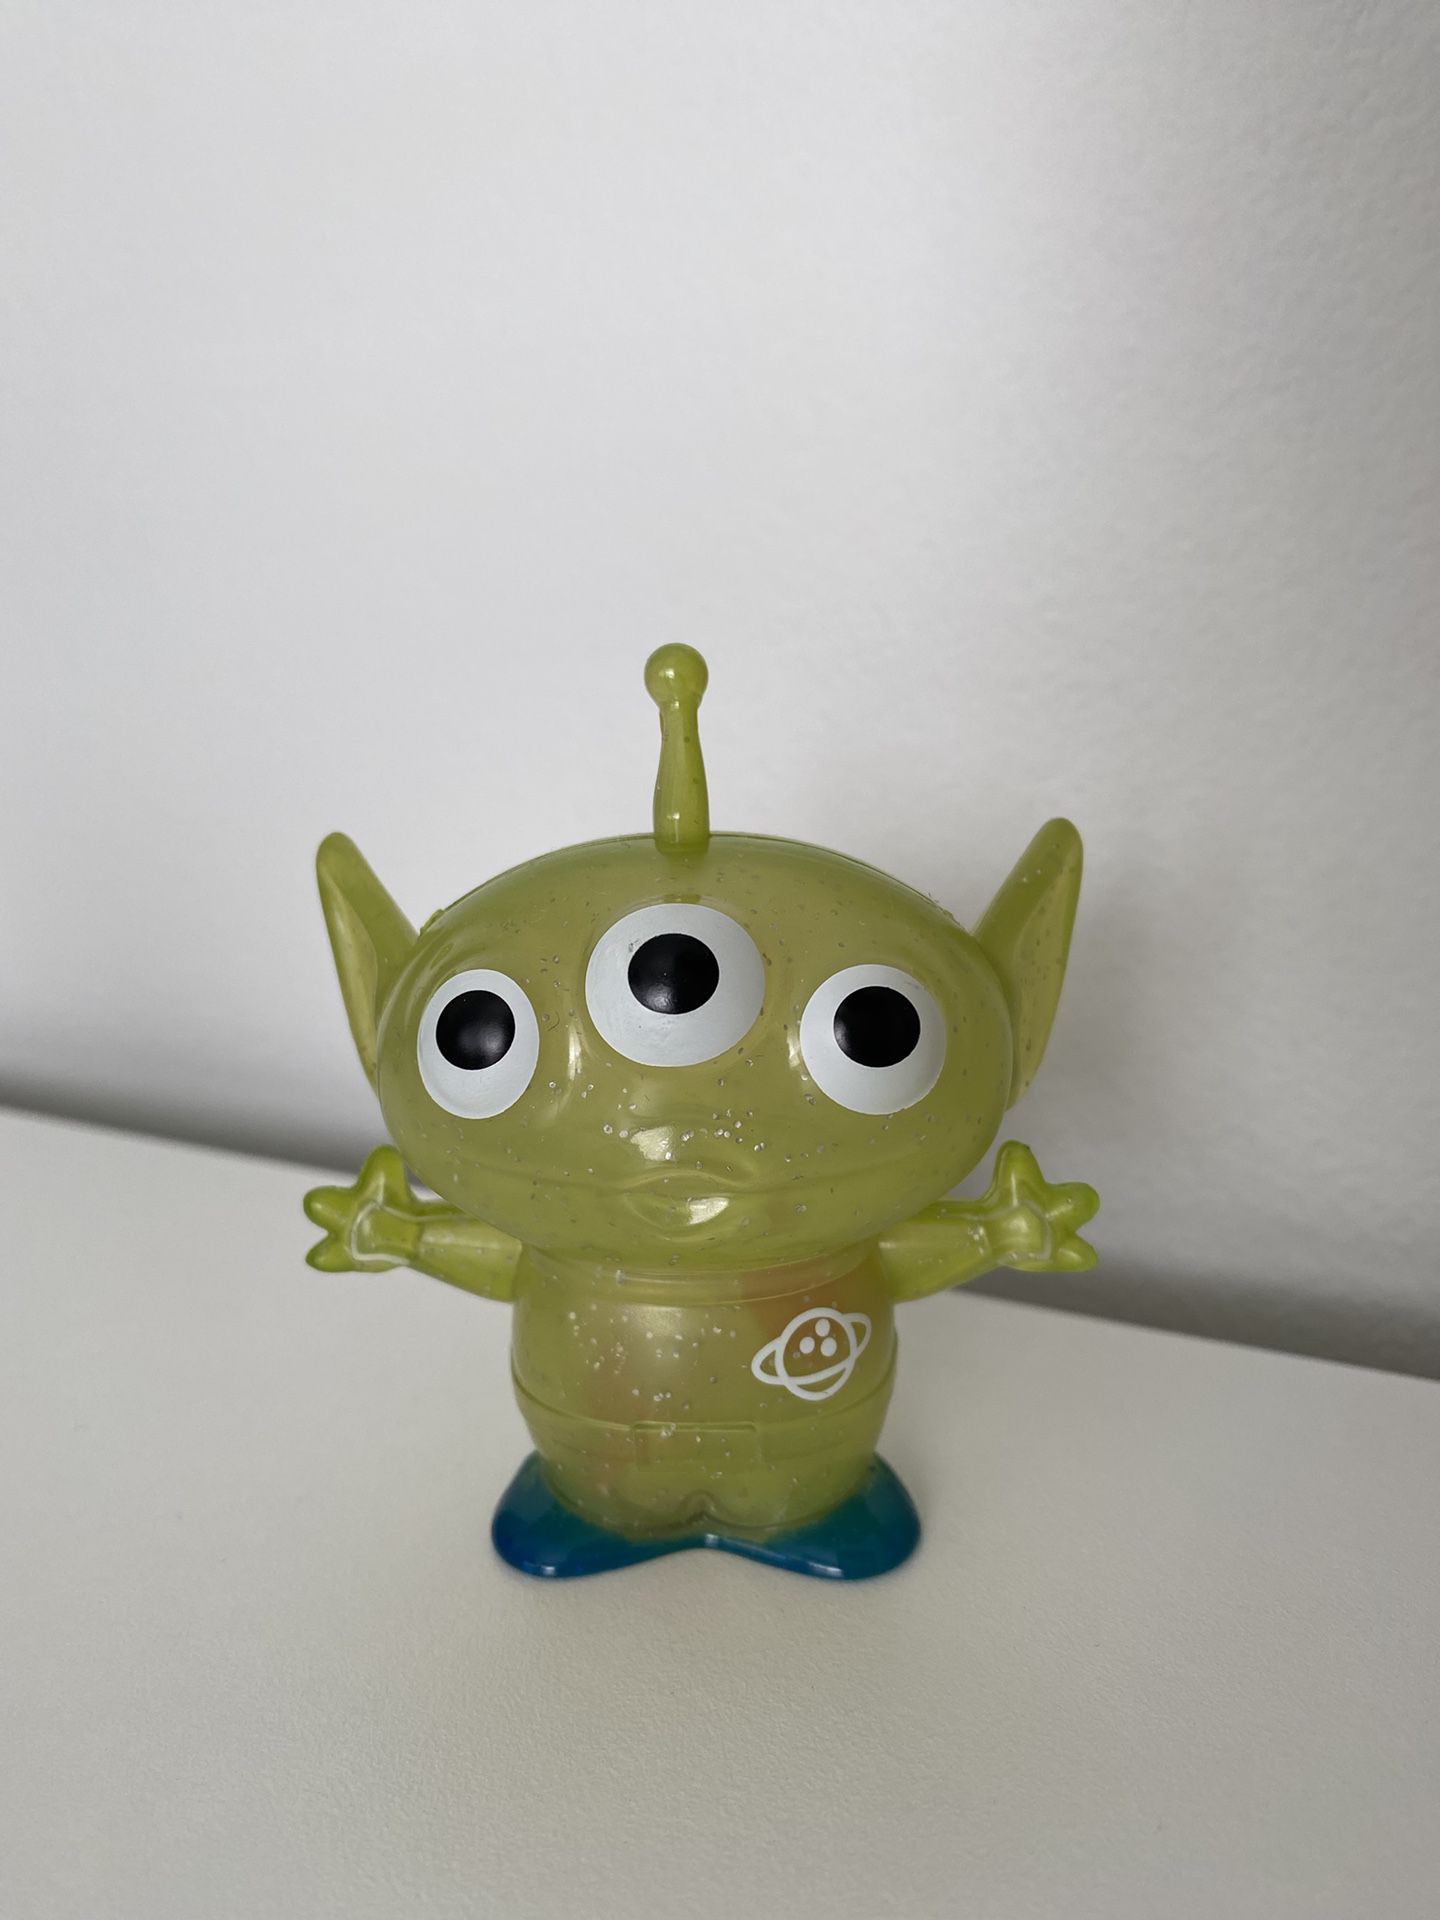 MINISO Toy Story Alien Blind Box Figure Gifts Toys Collectibles Blue Green Pop Mart